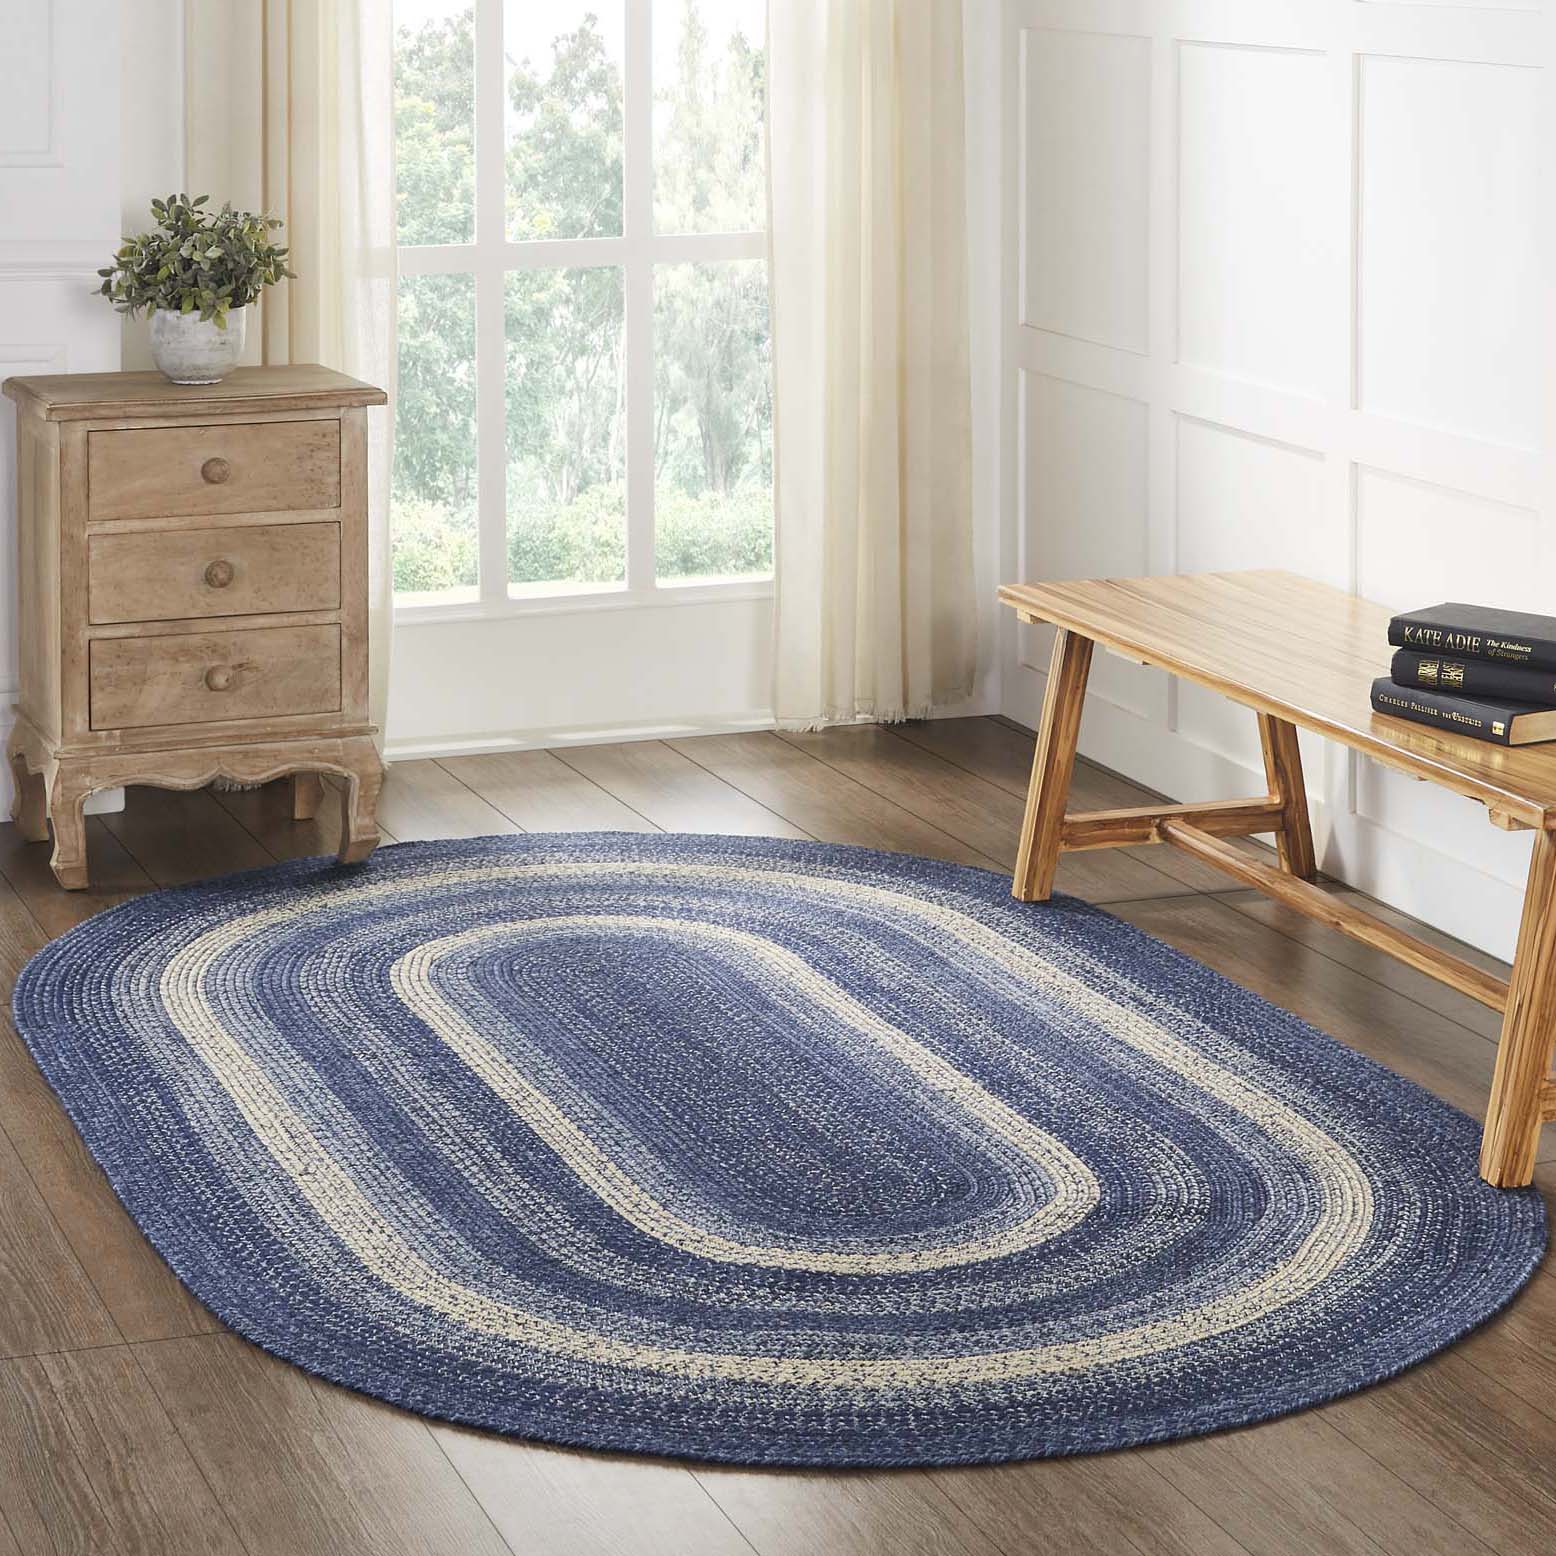 Great Falls Blue Jute Braided Rug Oval with Rug Pad 5'x8' VHC Brands